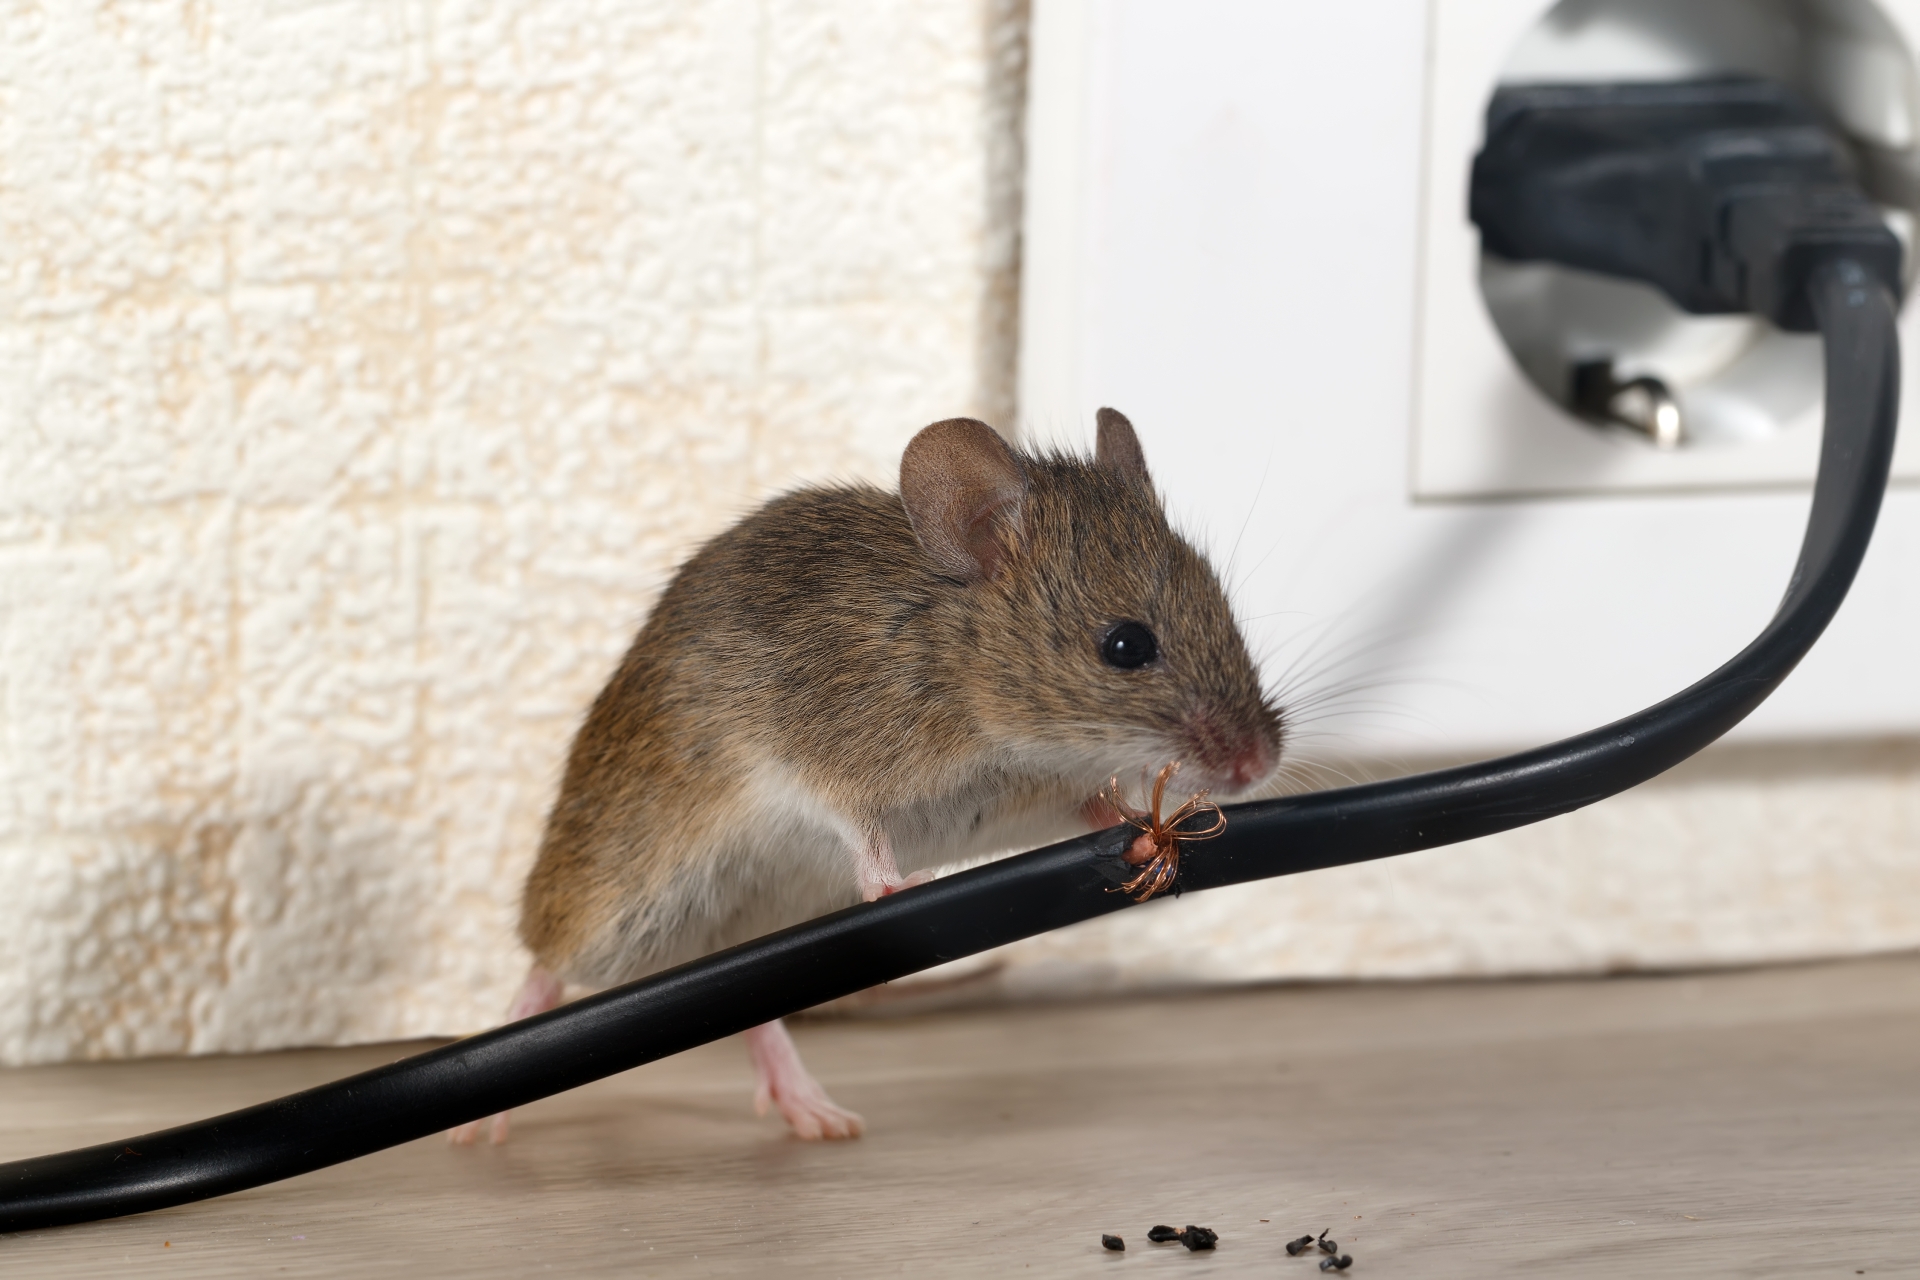 Mice Infestation, Pest Control in Walton-on-Thames, Hersham, KT12. Call Now 020 8166 9746